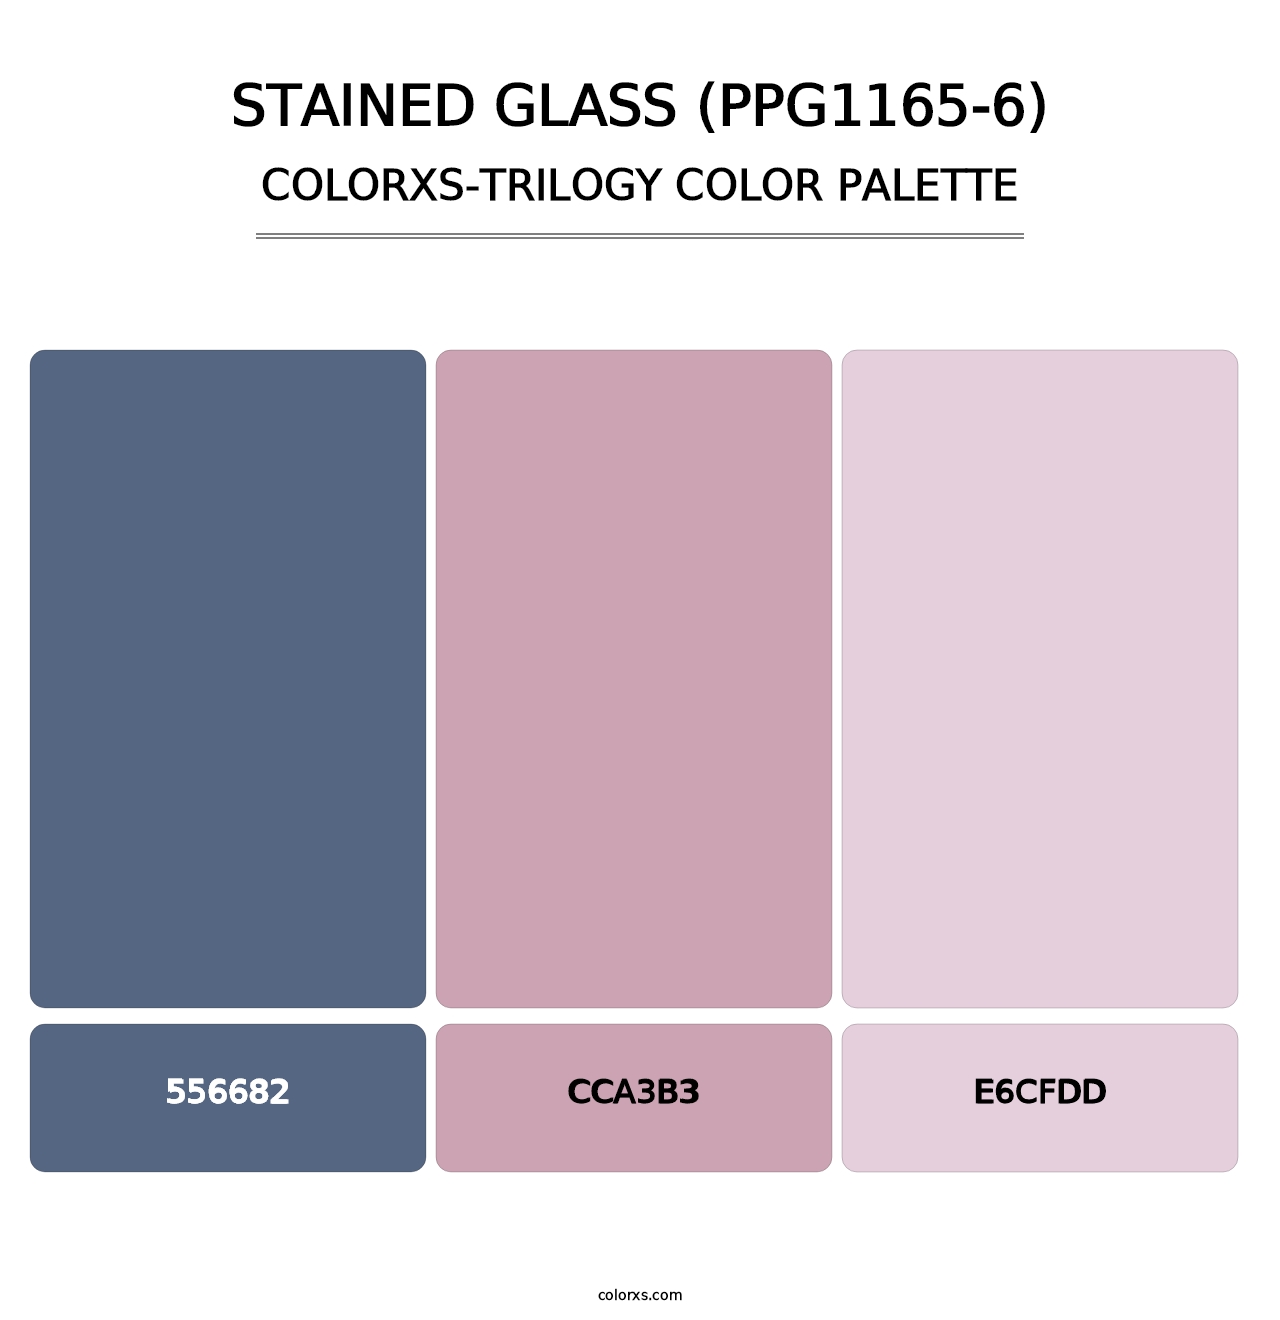 Stained Glass (PPG1165-6) - Colorxs Trilogy Palette